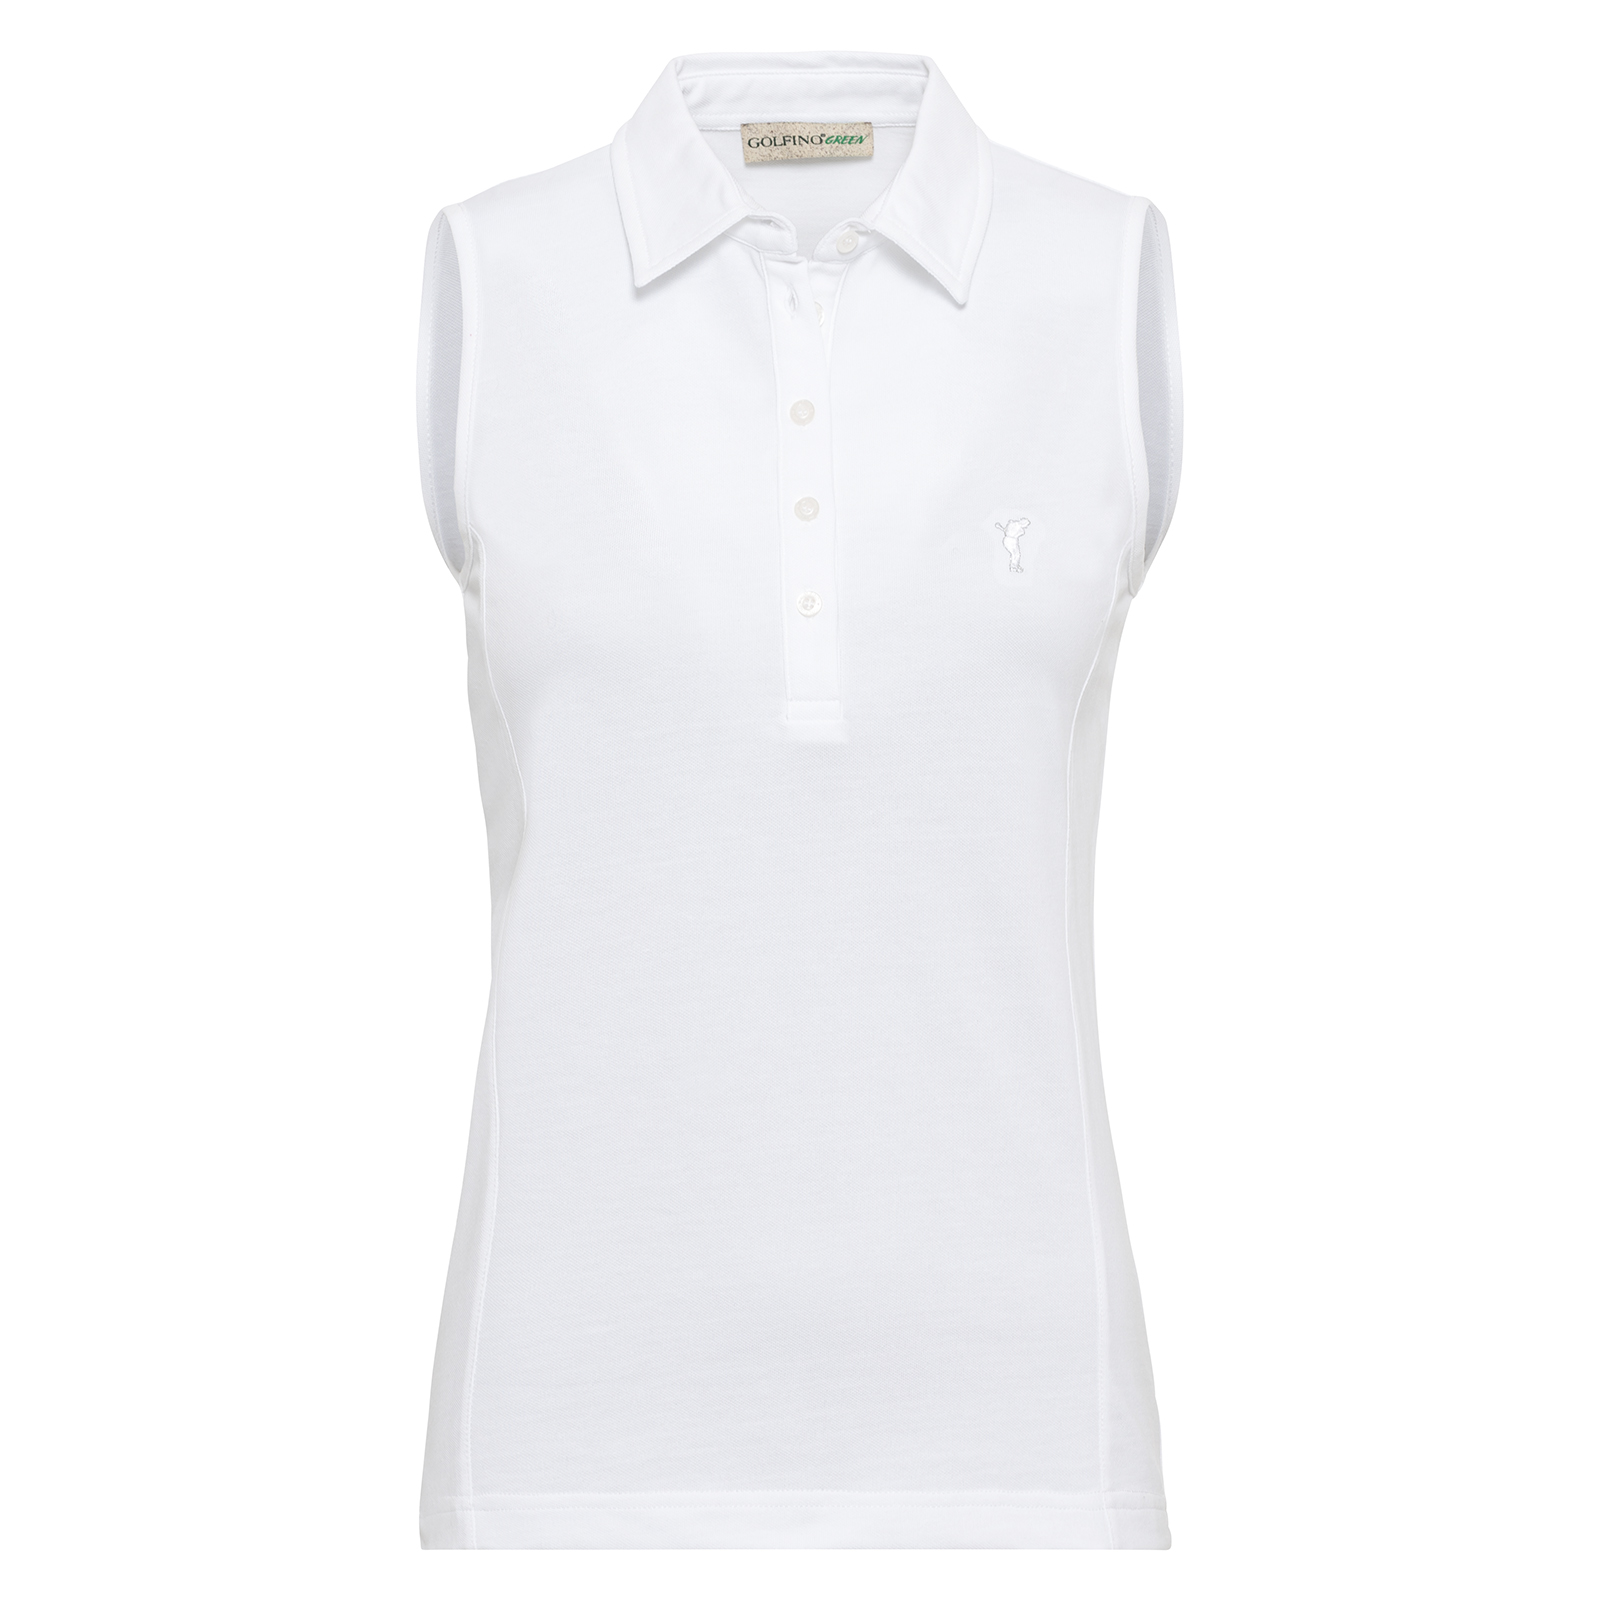 Ladies' golf top made from sustainably produced fabric 